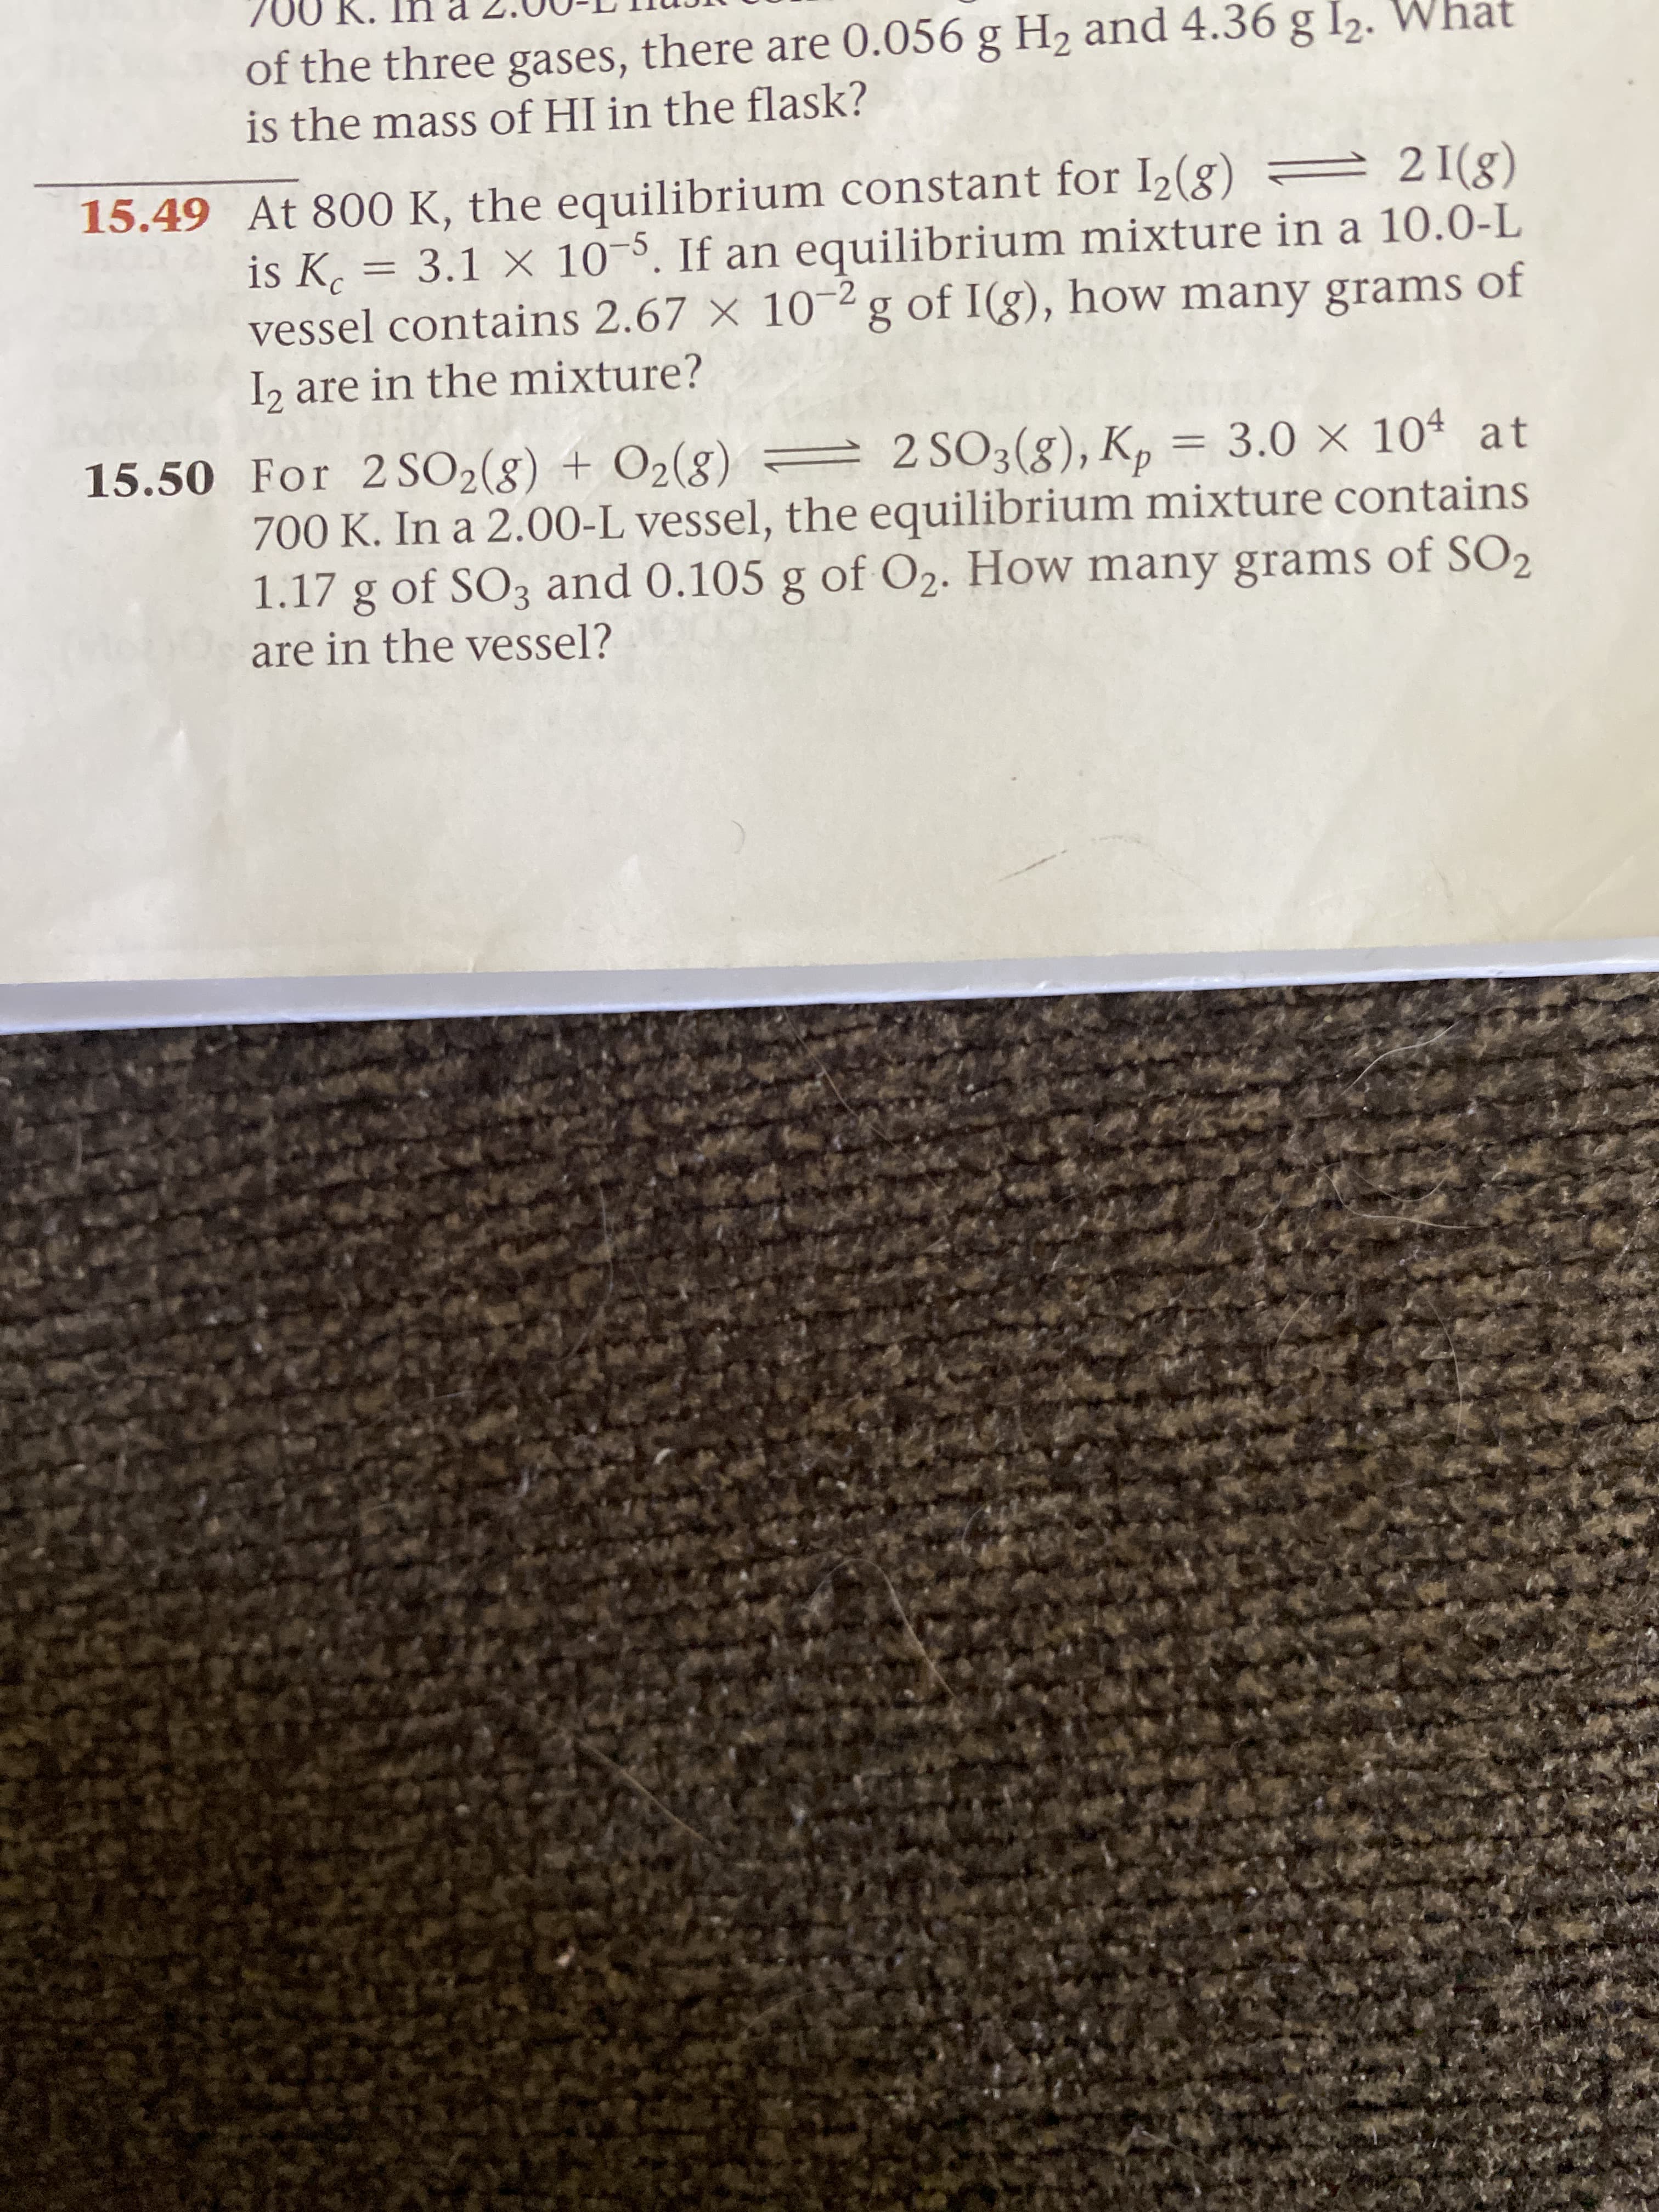 For 2 SO2(g) + O2(g) = 2 SO3(8), K,
700 K. In a 2.00-L vessel, the equilibrium mixture contains
1.17 g of SO3 and 0.105 g of O2. How many grams of SO2
= 3.0 × 104 at
%3D
are in the vessel?
